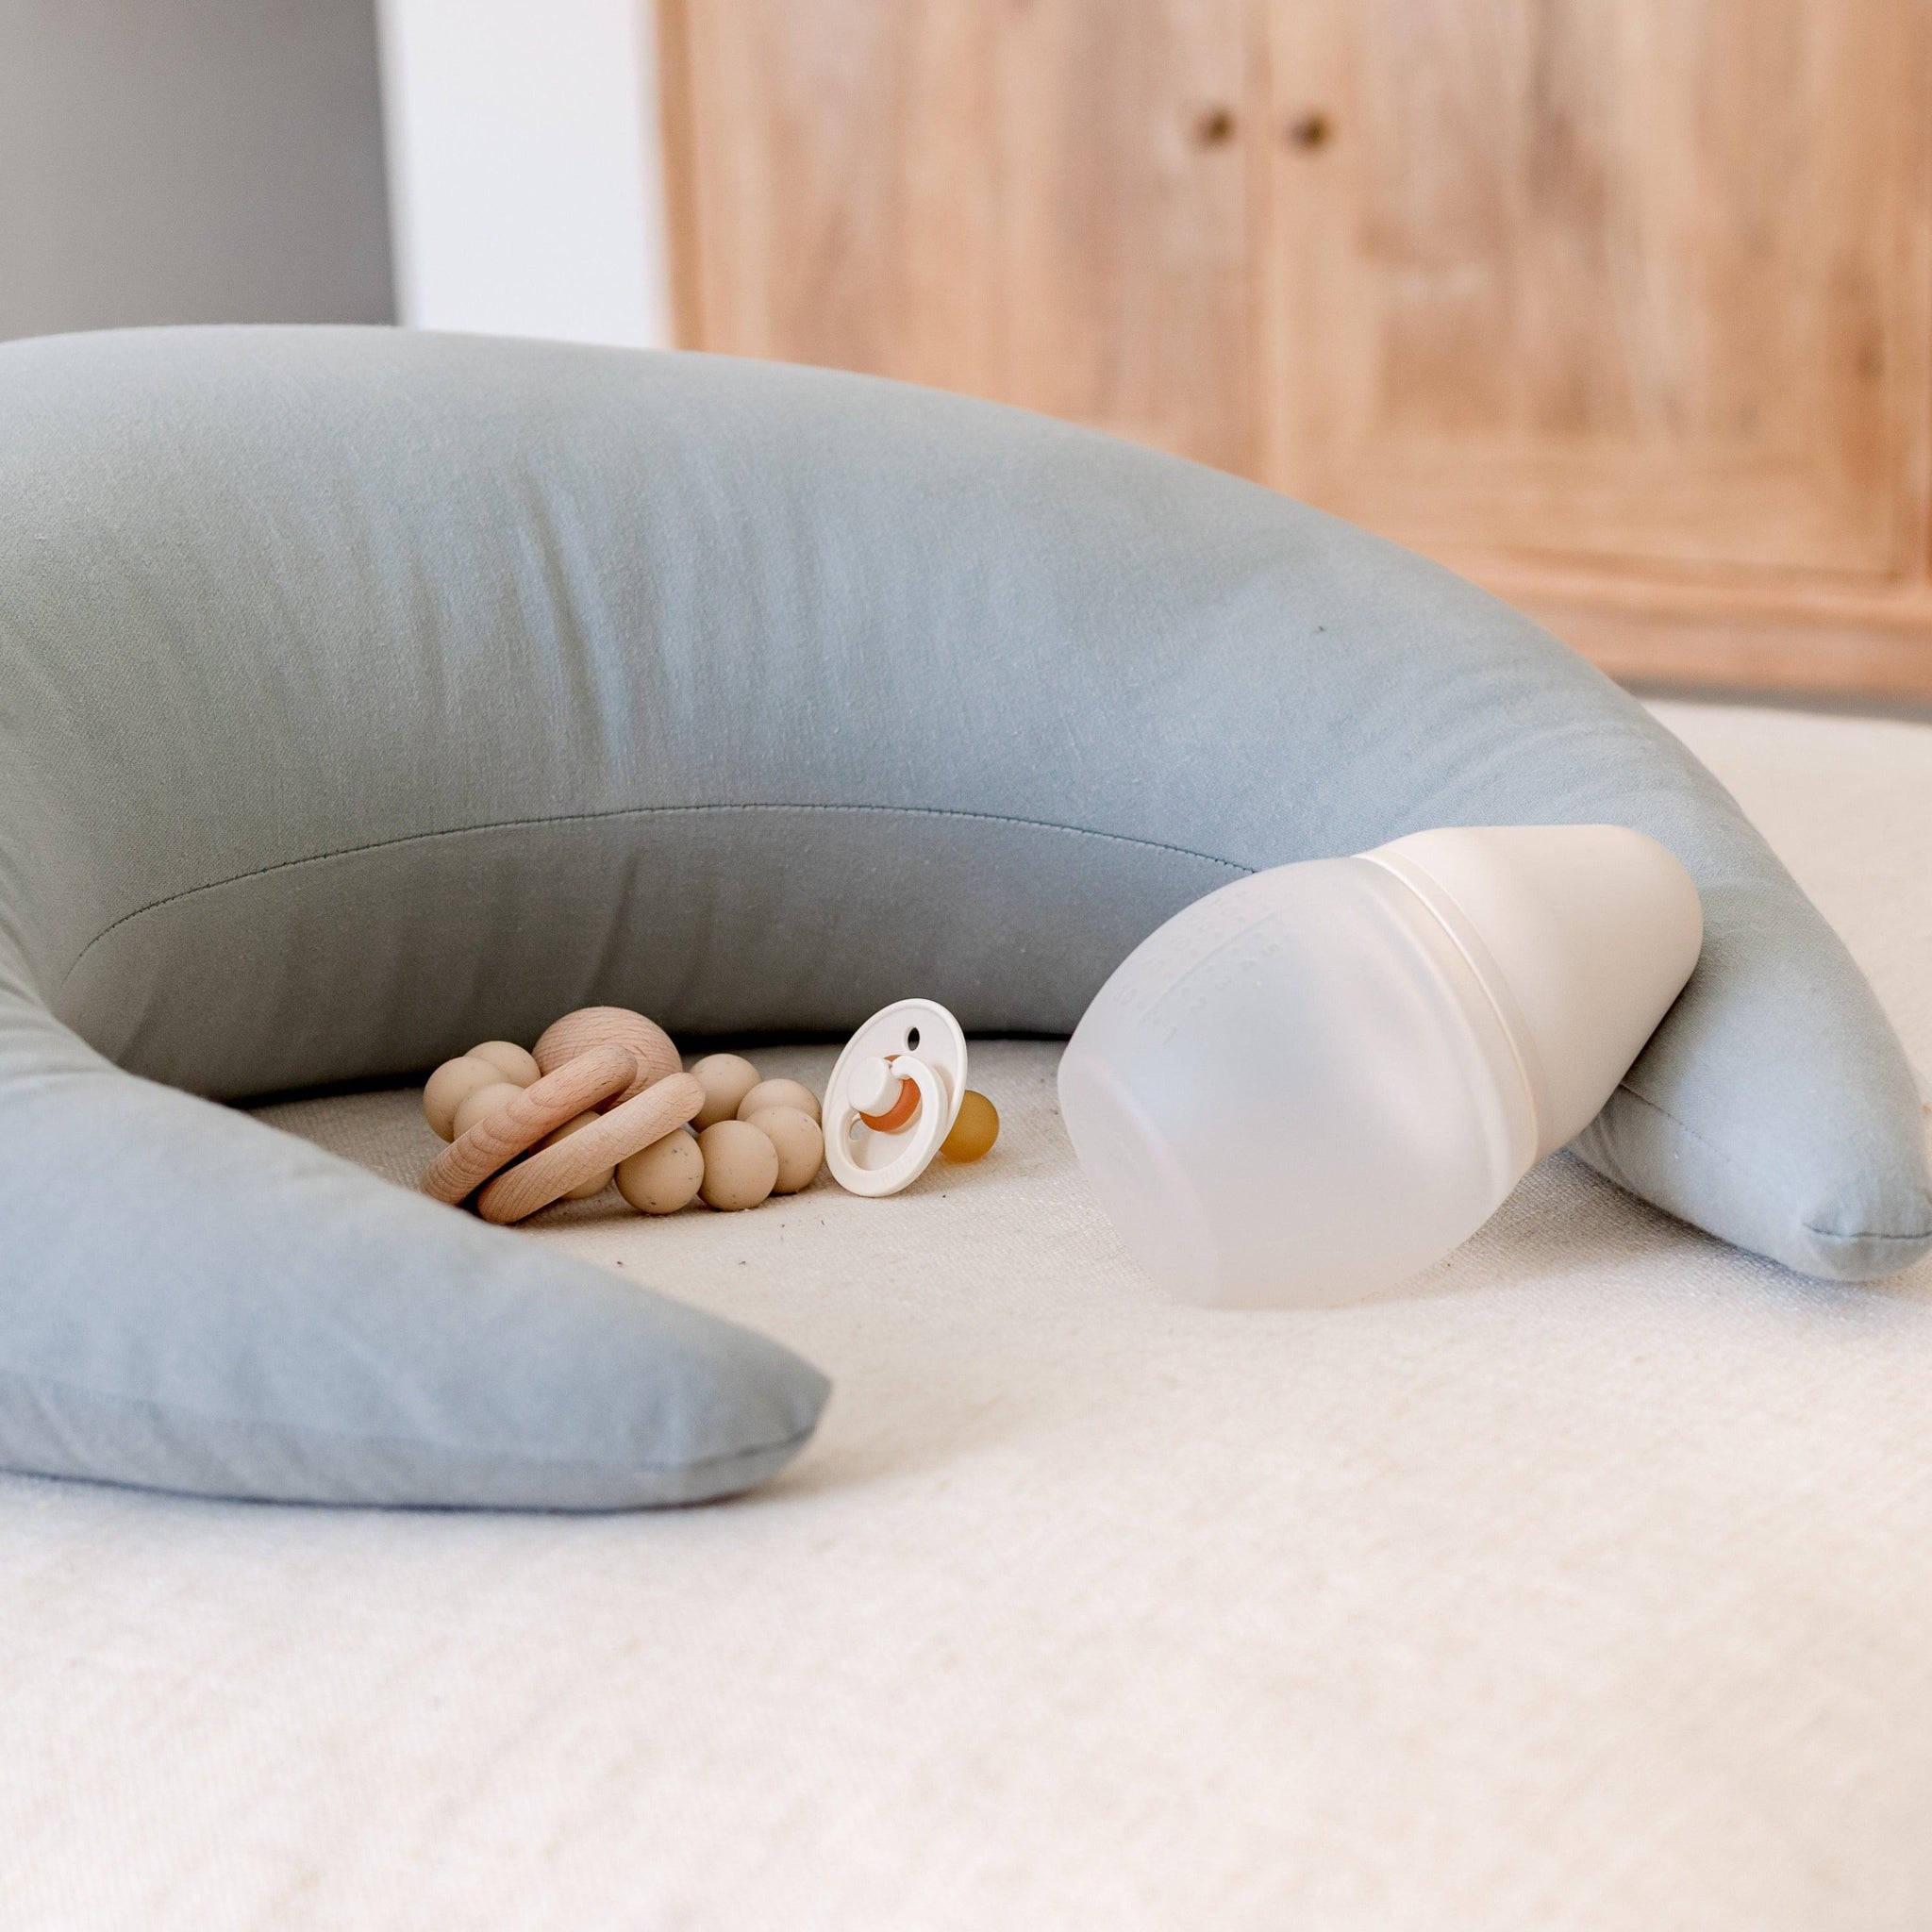 Snuggle Me Feeding + Support Pillow will aid you in nursing, bottle feeding, sitting up support, tummy time, a toddler pillow and more.